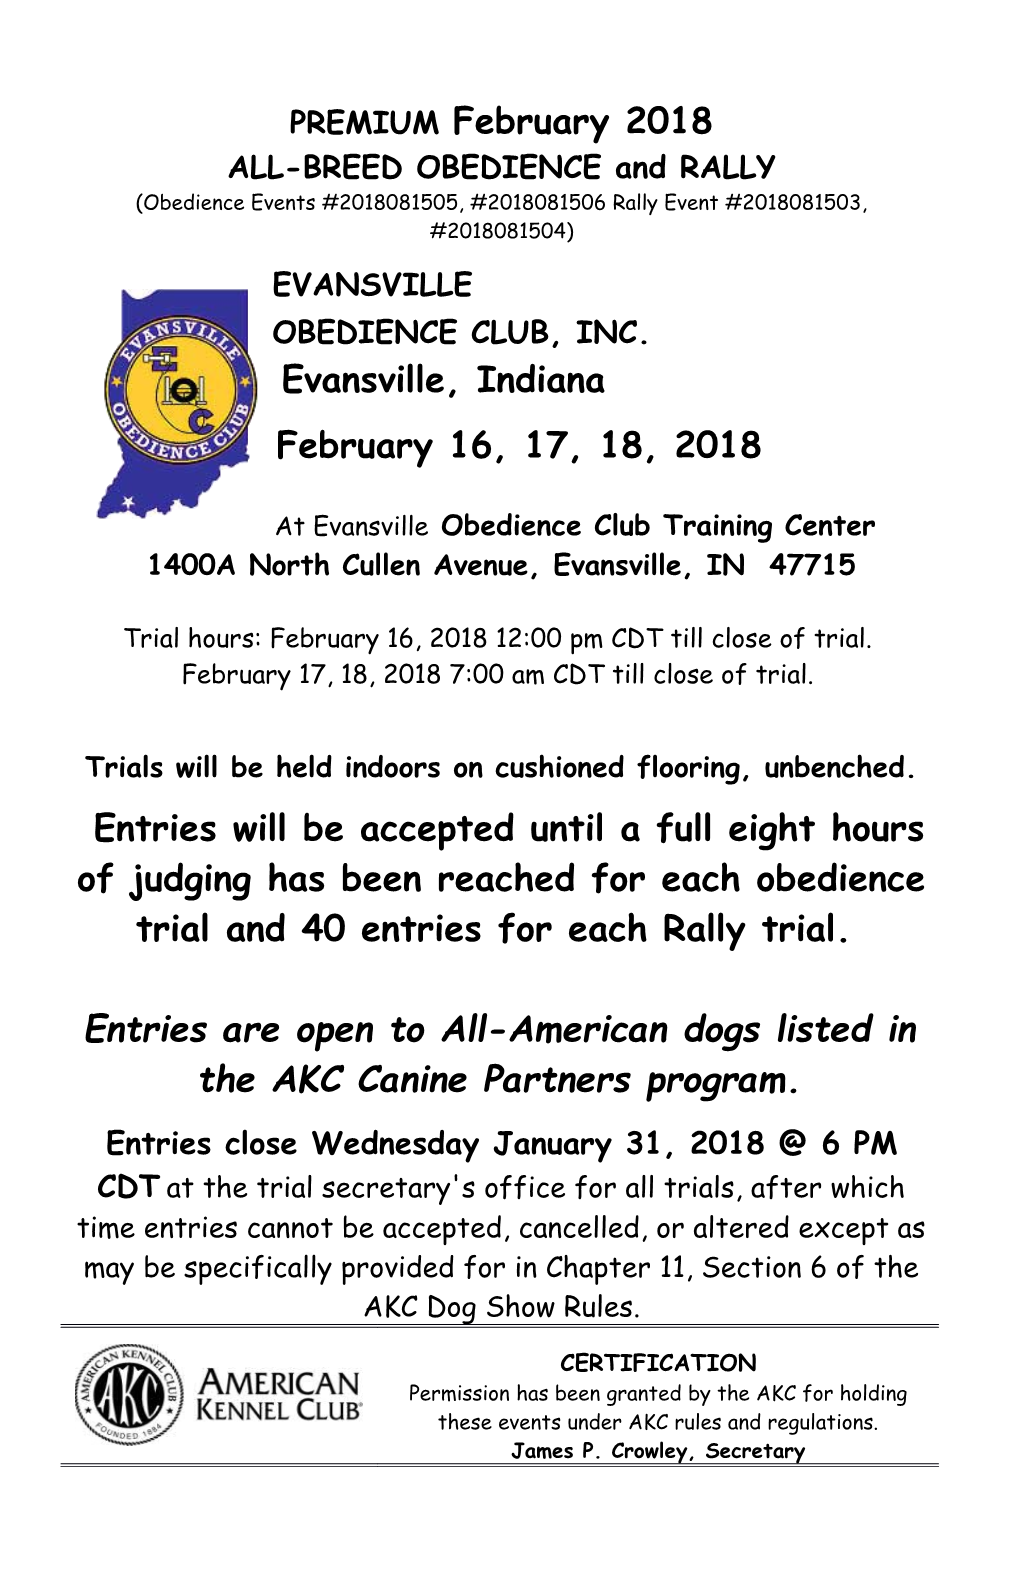 All-Breed OBEDIENCE and RALLY